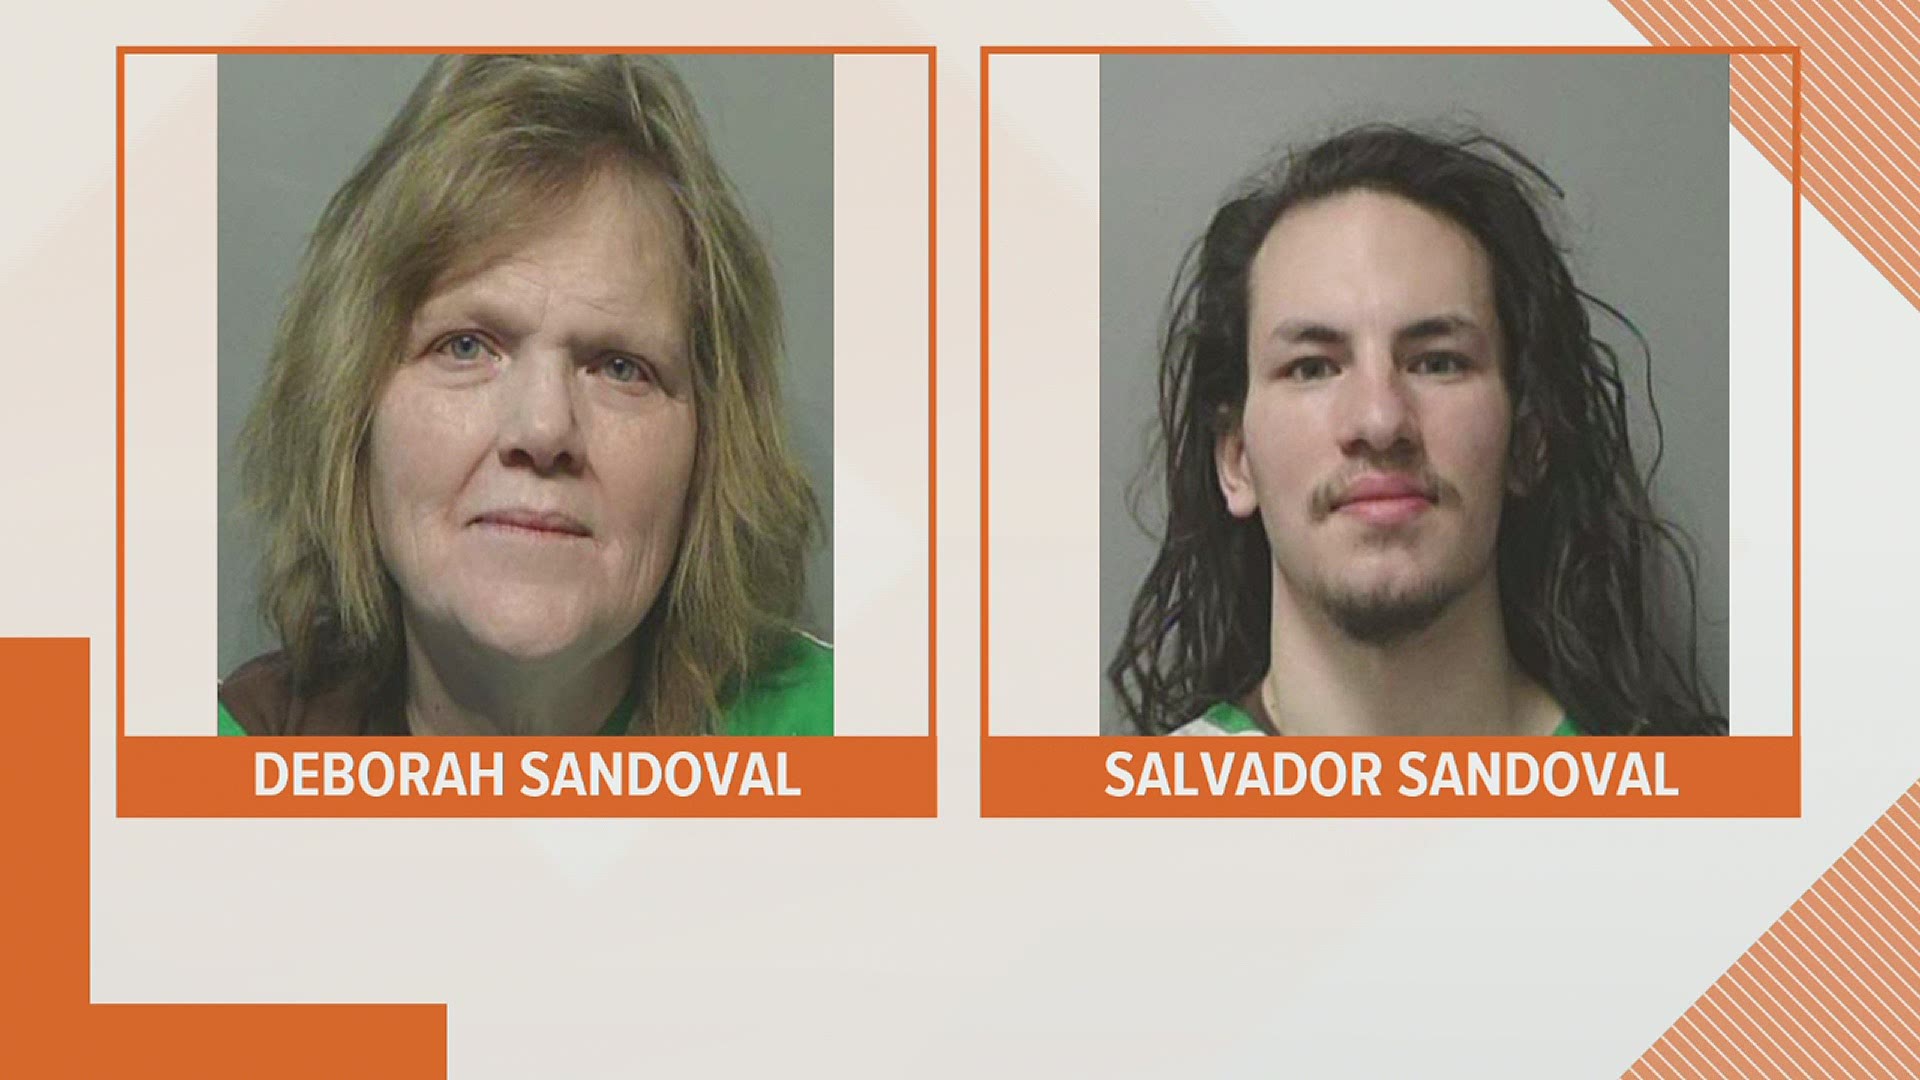 The mother and son face several charges now and have made their initial appearance in court.